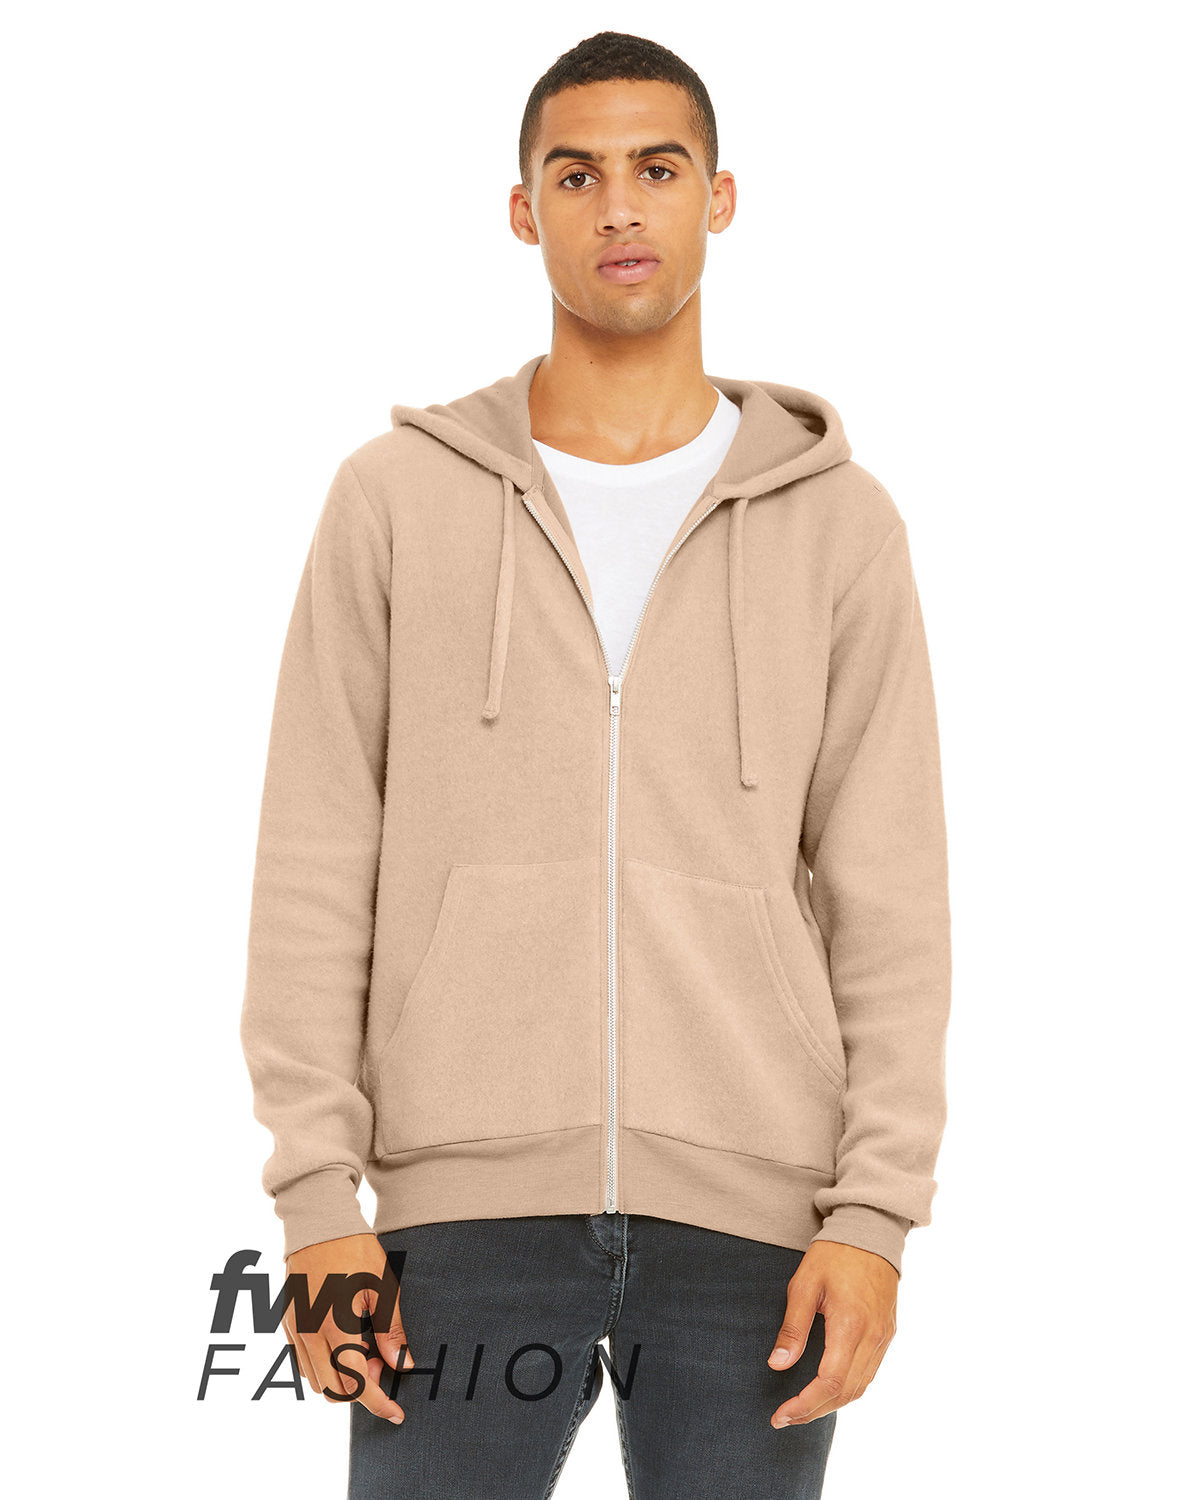 ELEVATE-YOUR-WARDROBE-BELLA-CANVAS-FWD-FASHION-ADULT-SUEDED-FLEECE-FULL-ZIP-HOODED-SWEATSHIRT-FOR-ULTIMATE-STYLE-AND-COZY-COMFORT